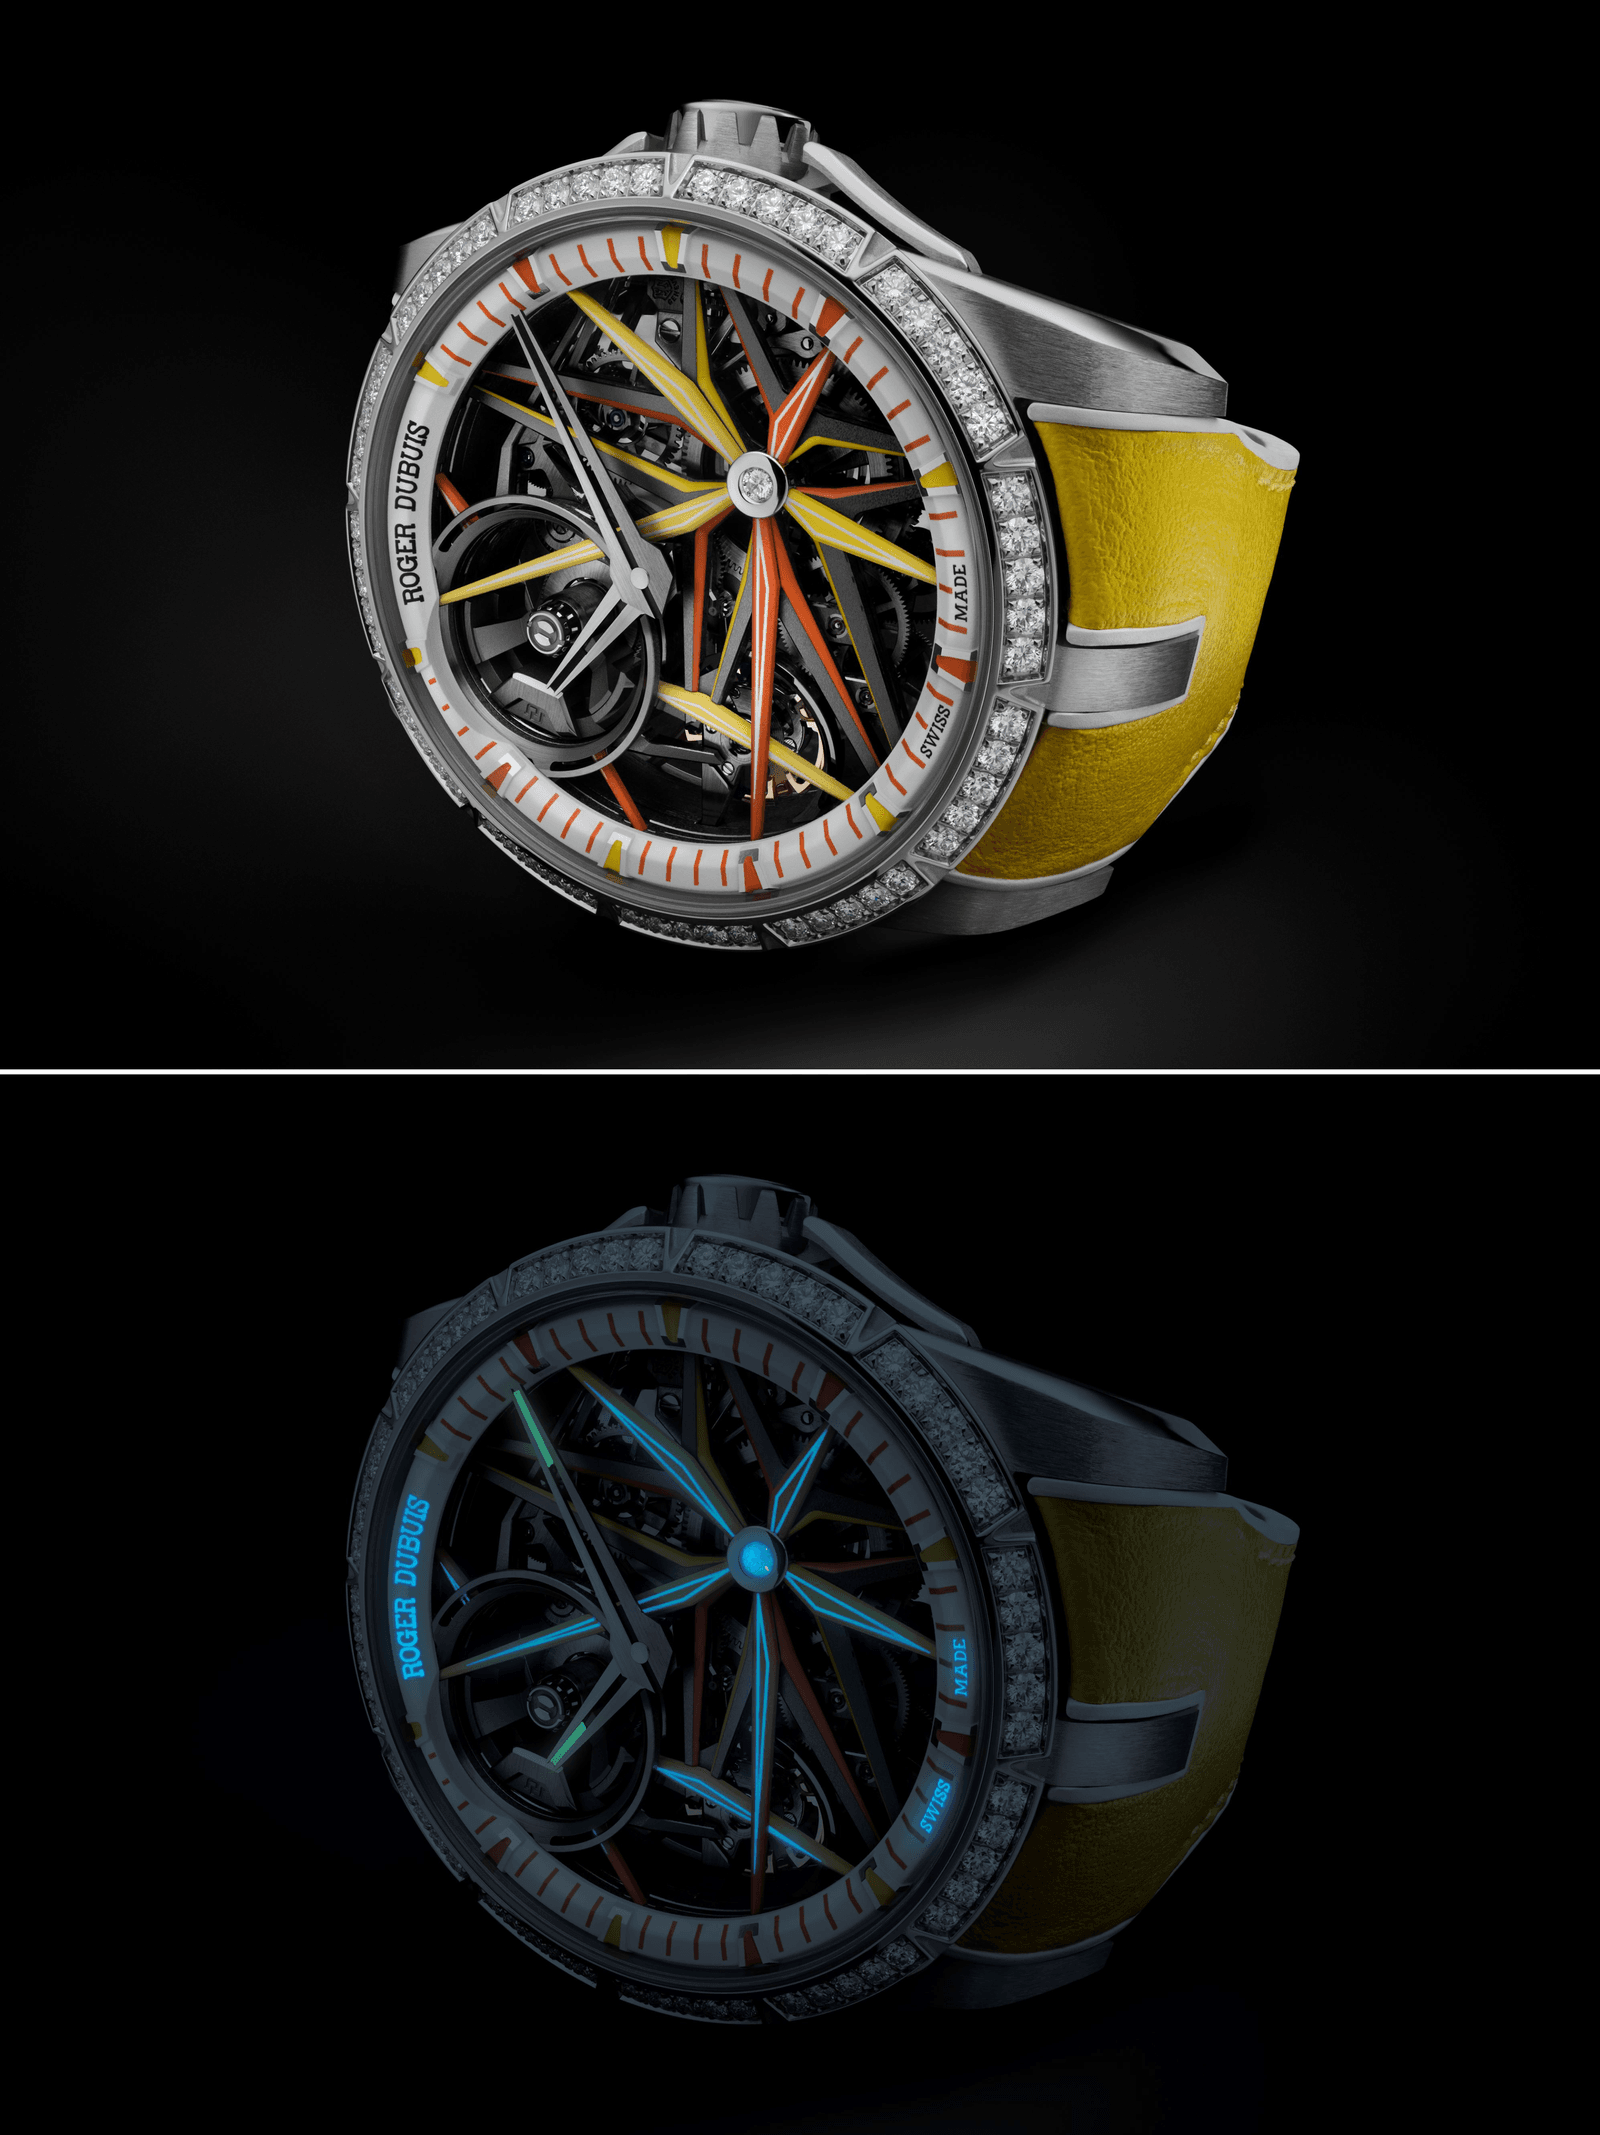 The Roger Dubuis Excalibur Blacklight Monobalancier (MB) is a hyper-luminescent, hyper-colorful, and hyper-performing timepiece